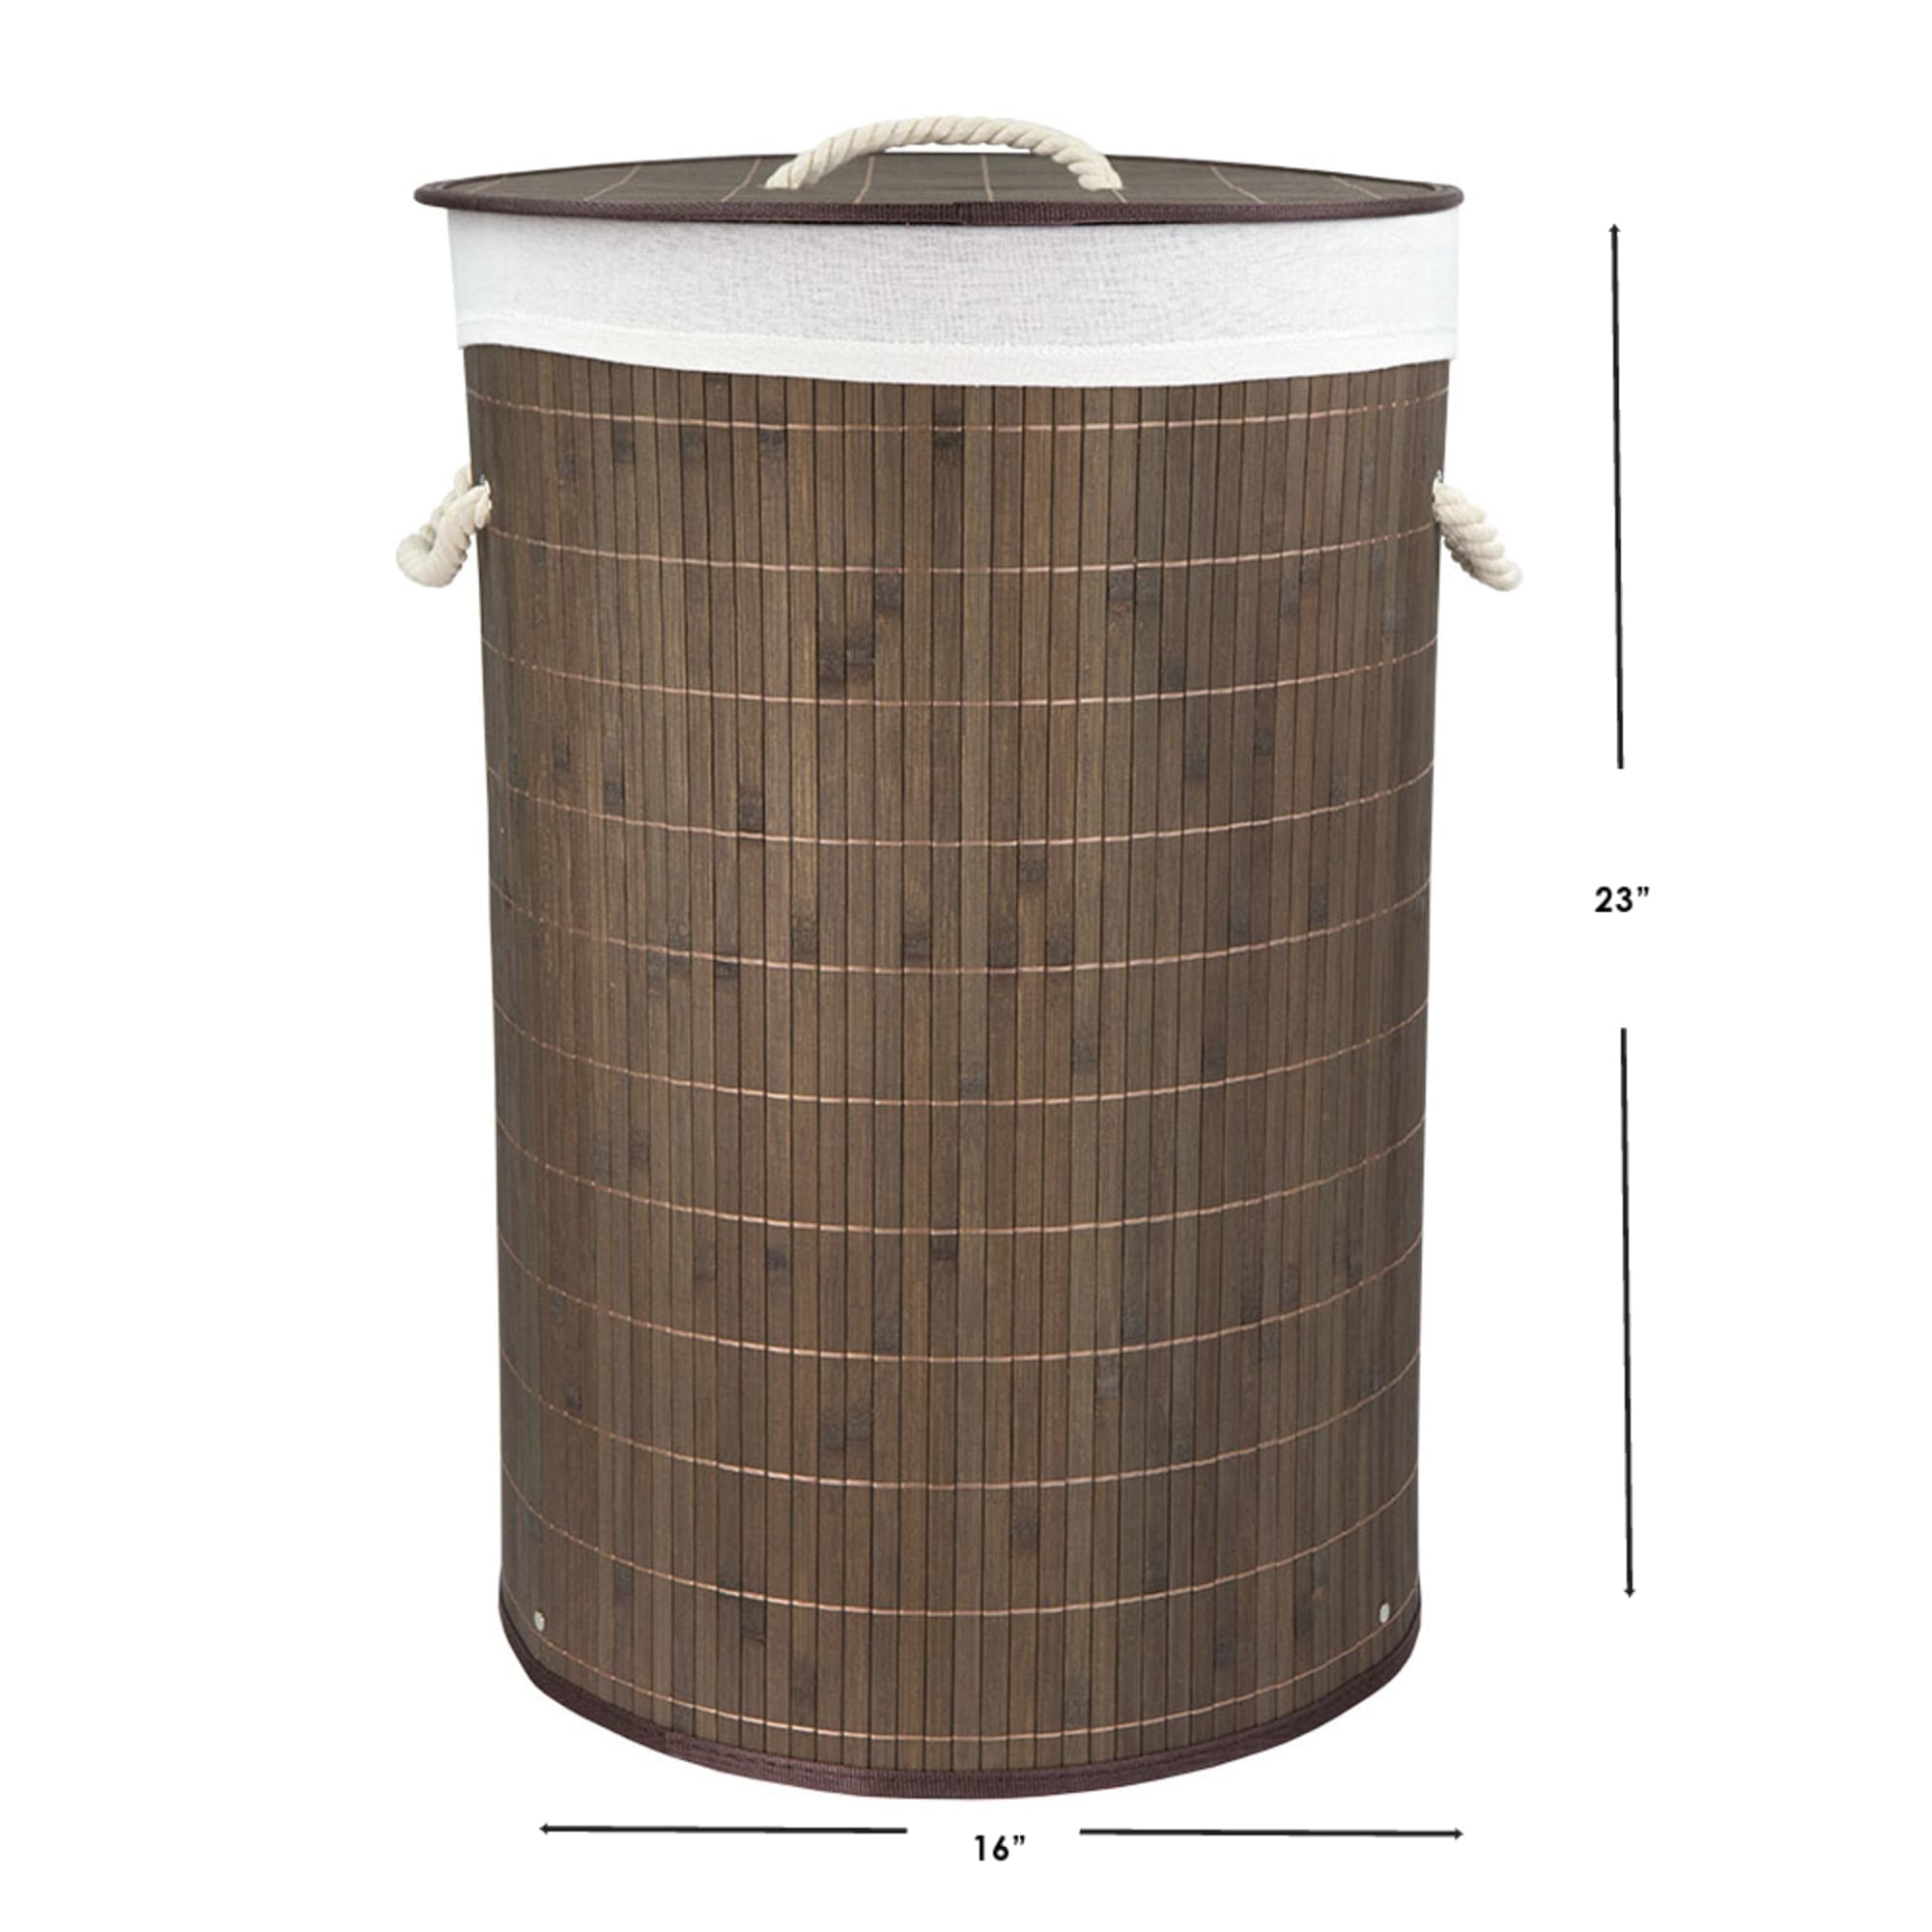 Home Basics Round Foldable Bamboo Hamper, Brown $15.00 EACH, CASE PACK OF 6